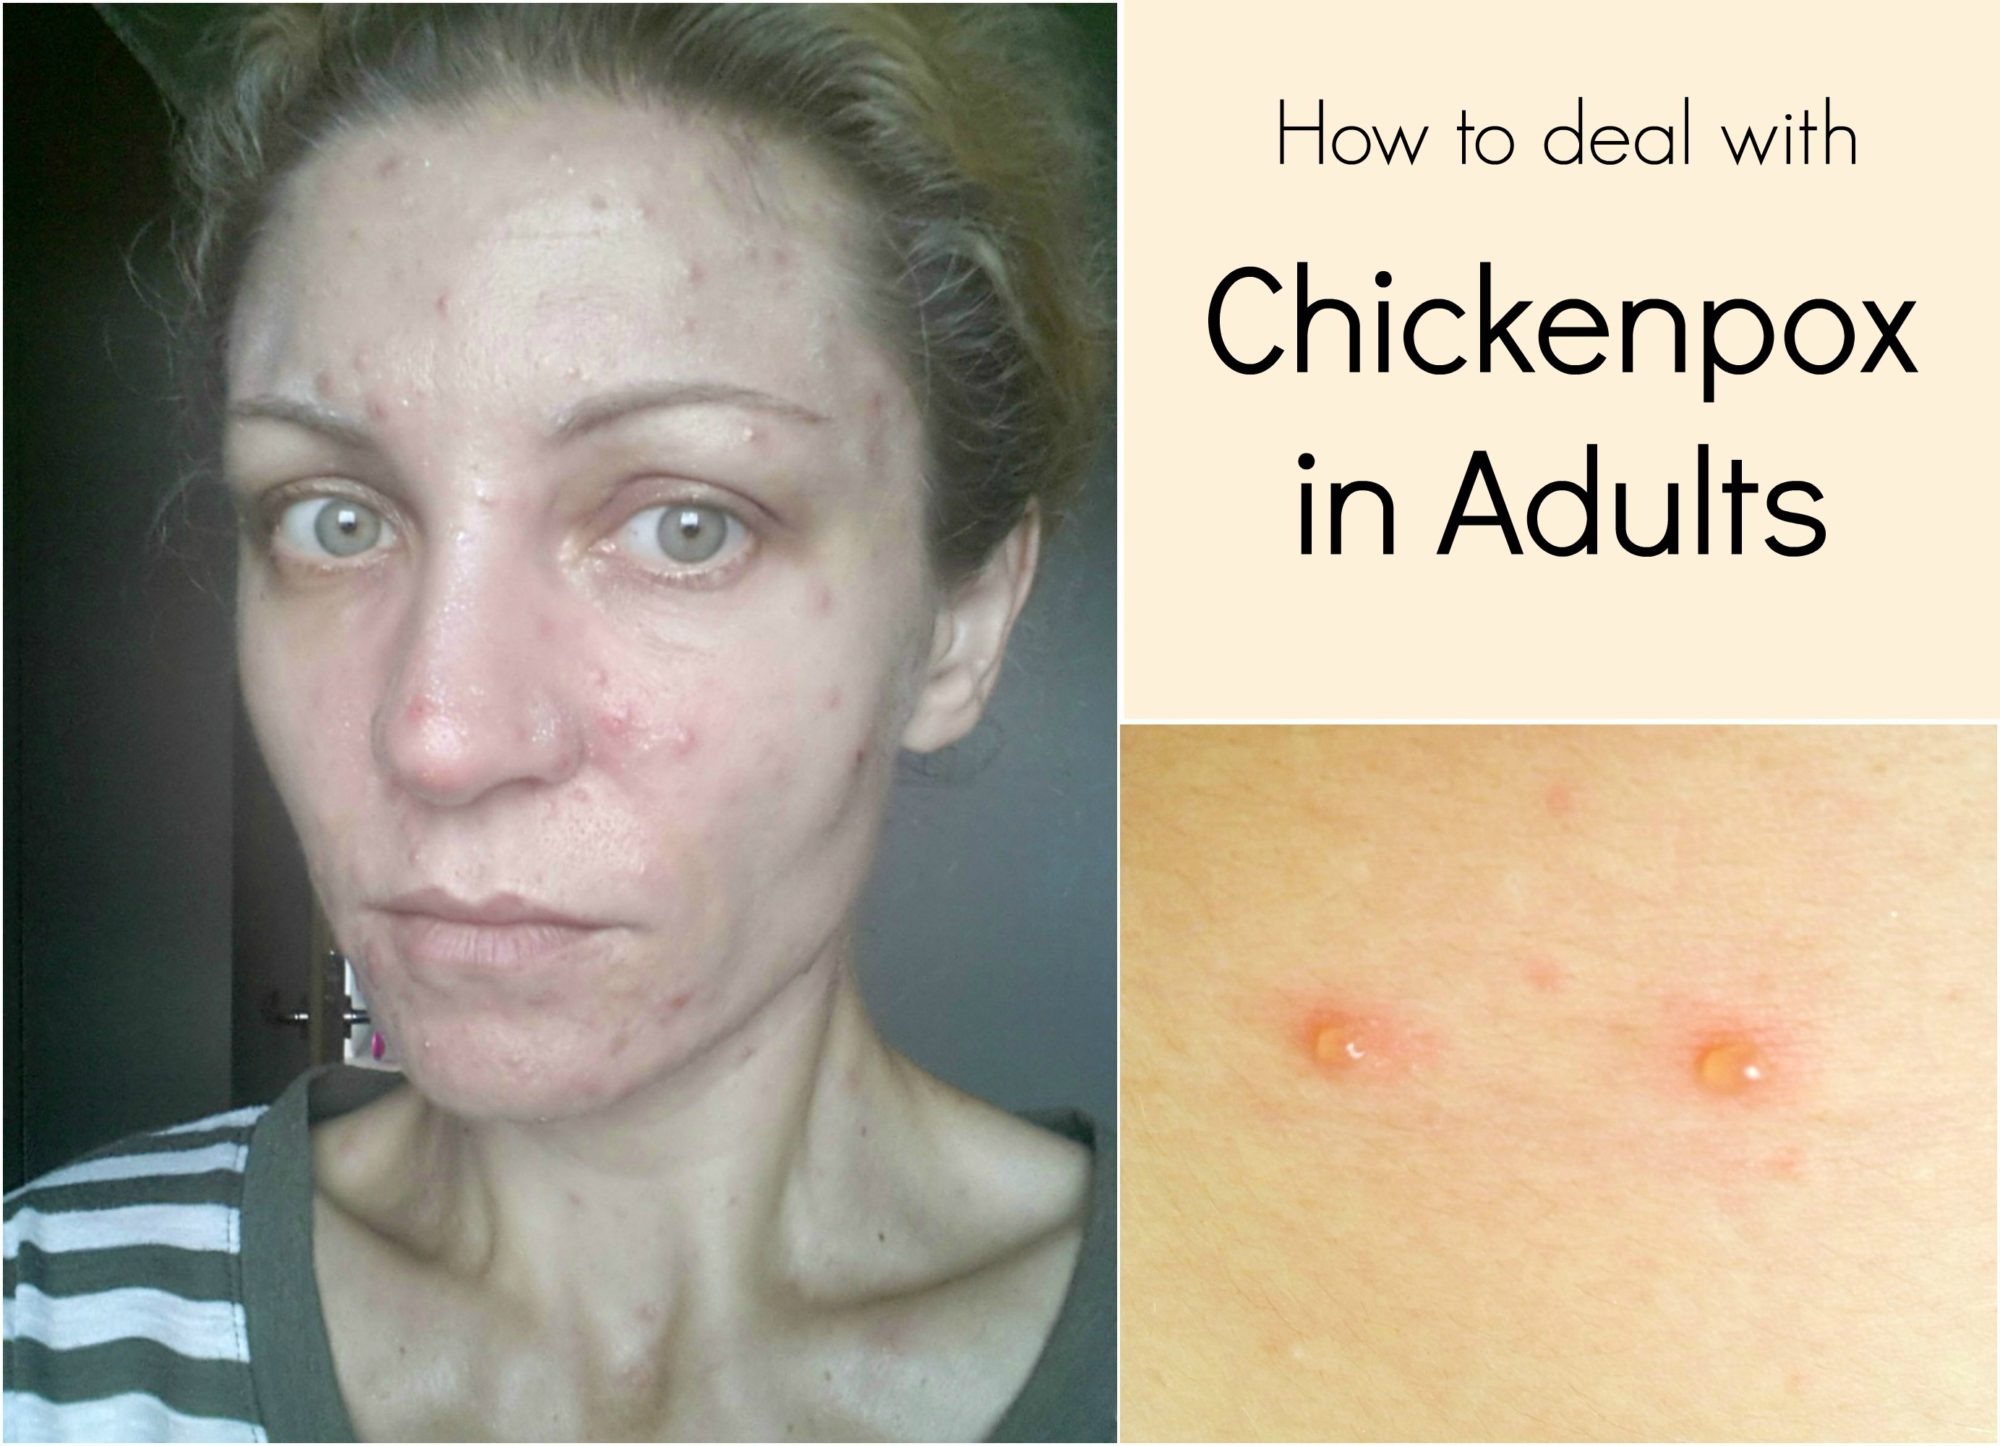 How to deal with chickenpox in adults